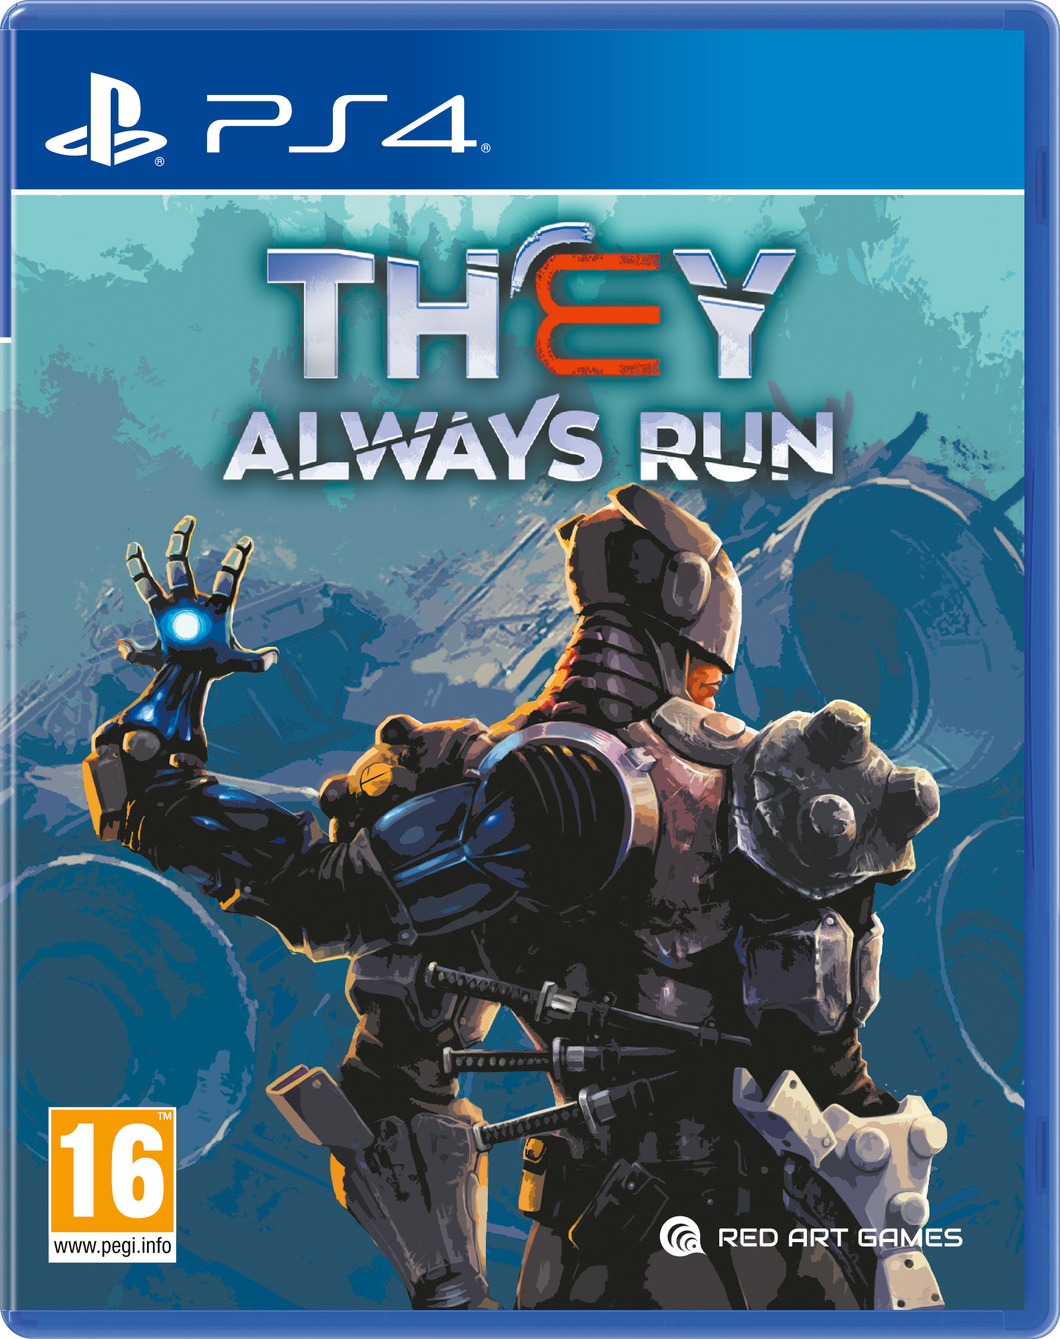 They always run / Red art games / PS4 / 1500 copies